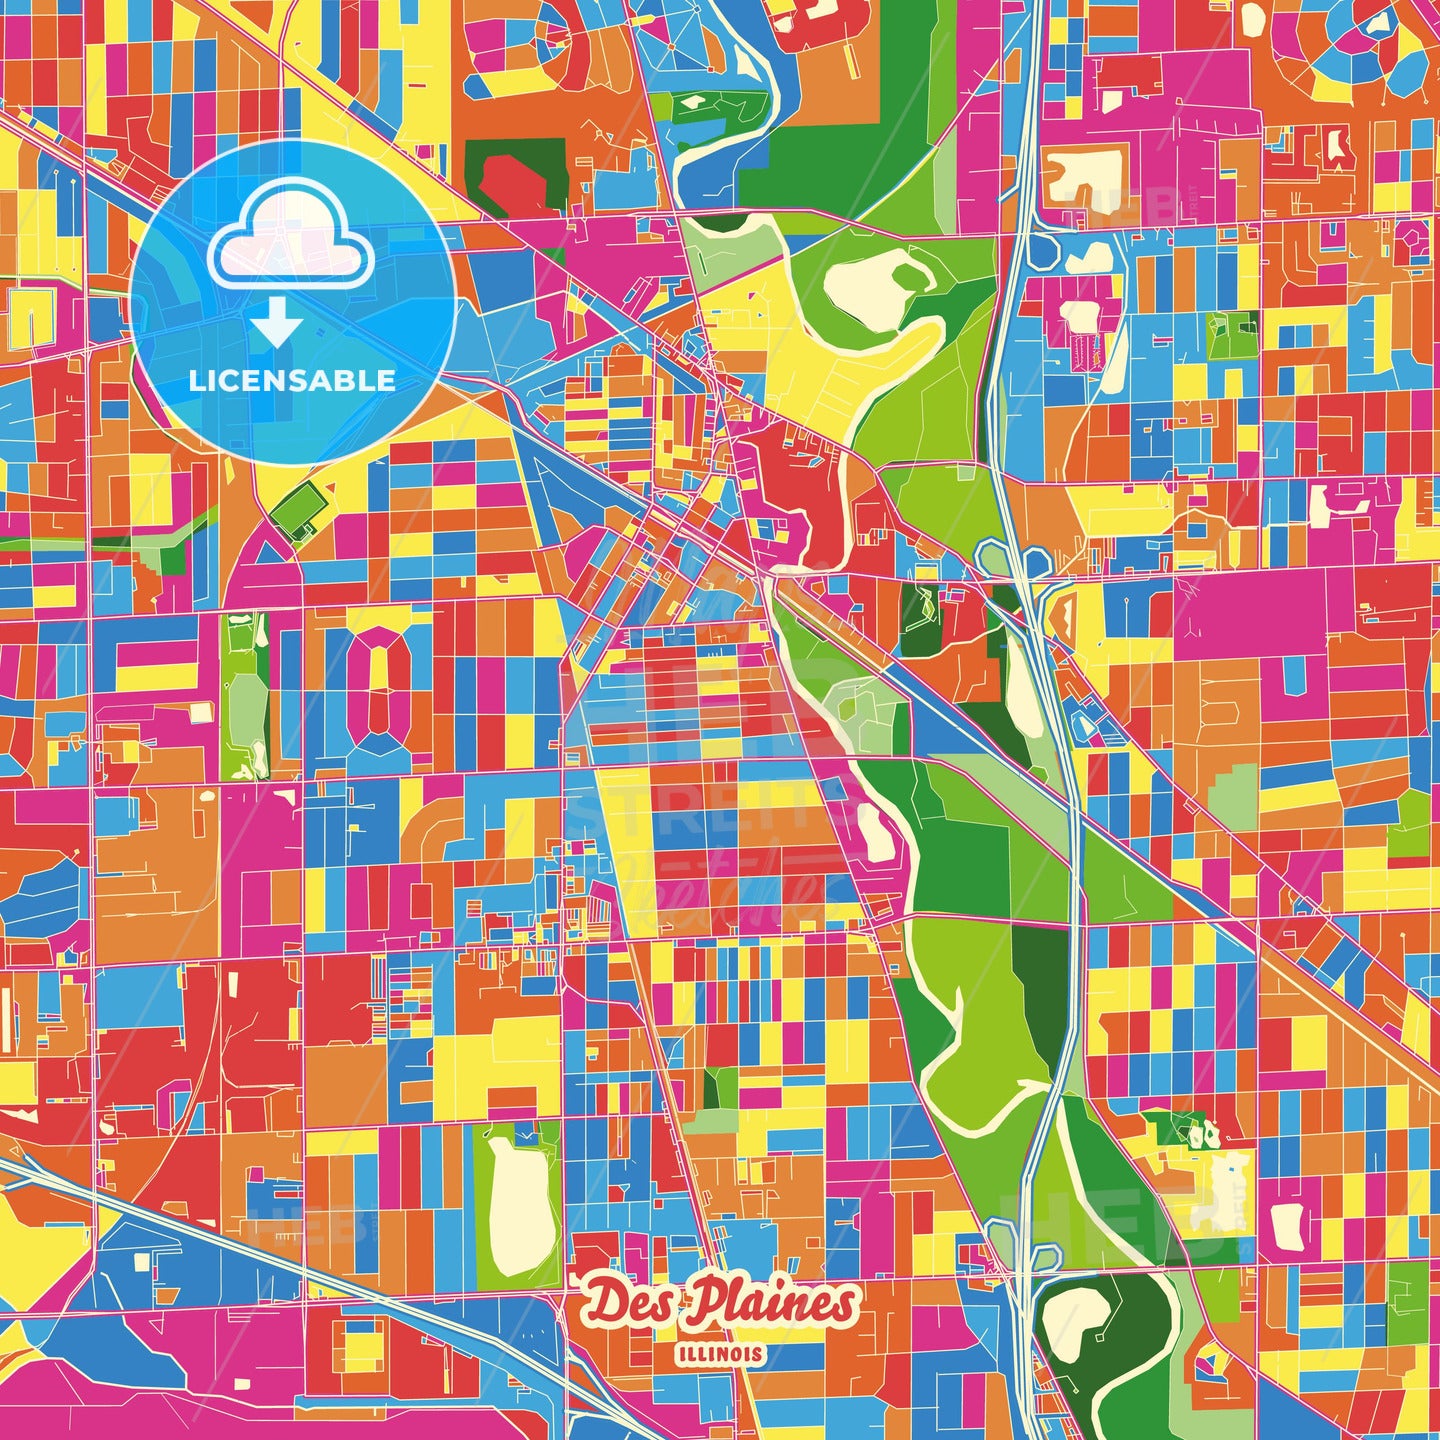 Des Plaines, United States Crazy Colorful Street Map Poster Template - HEBSTREITS Sketches